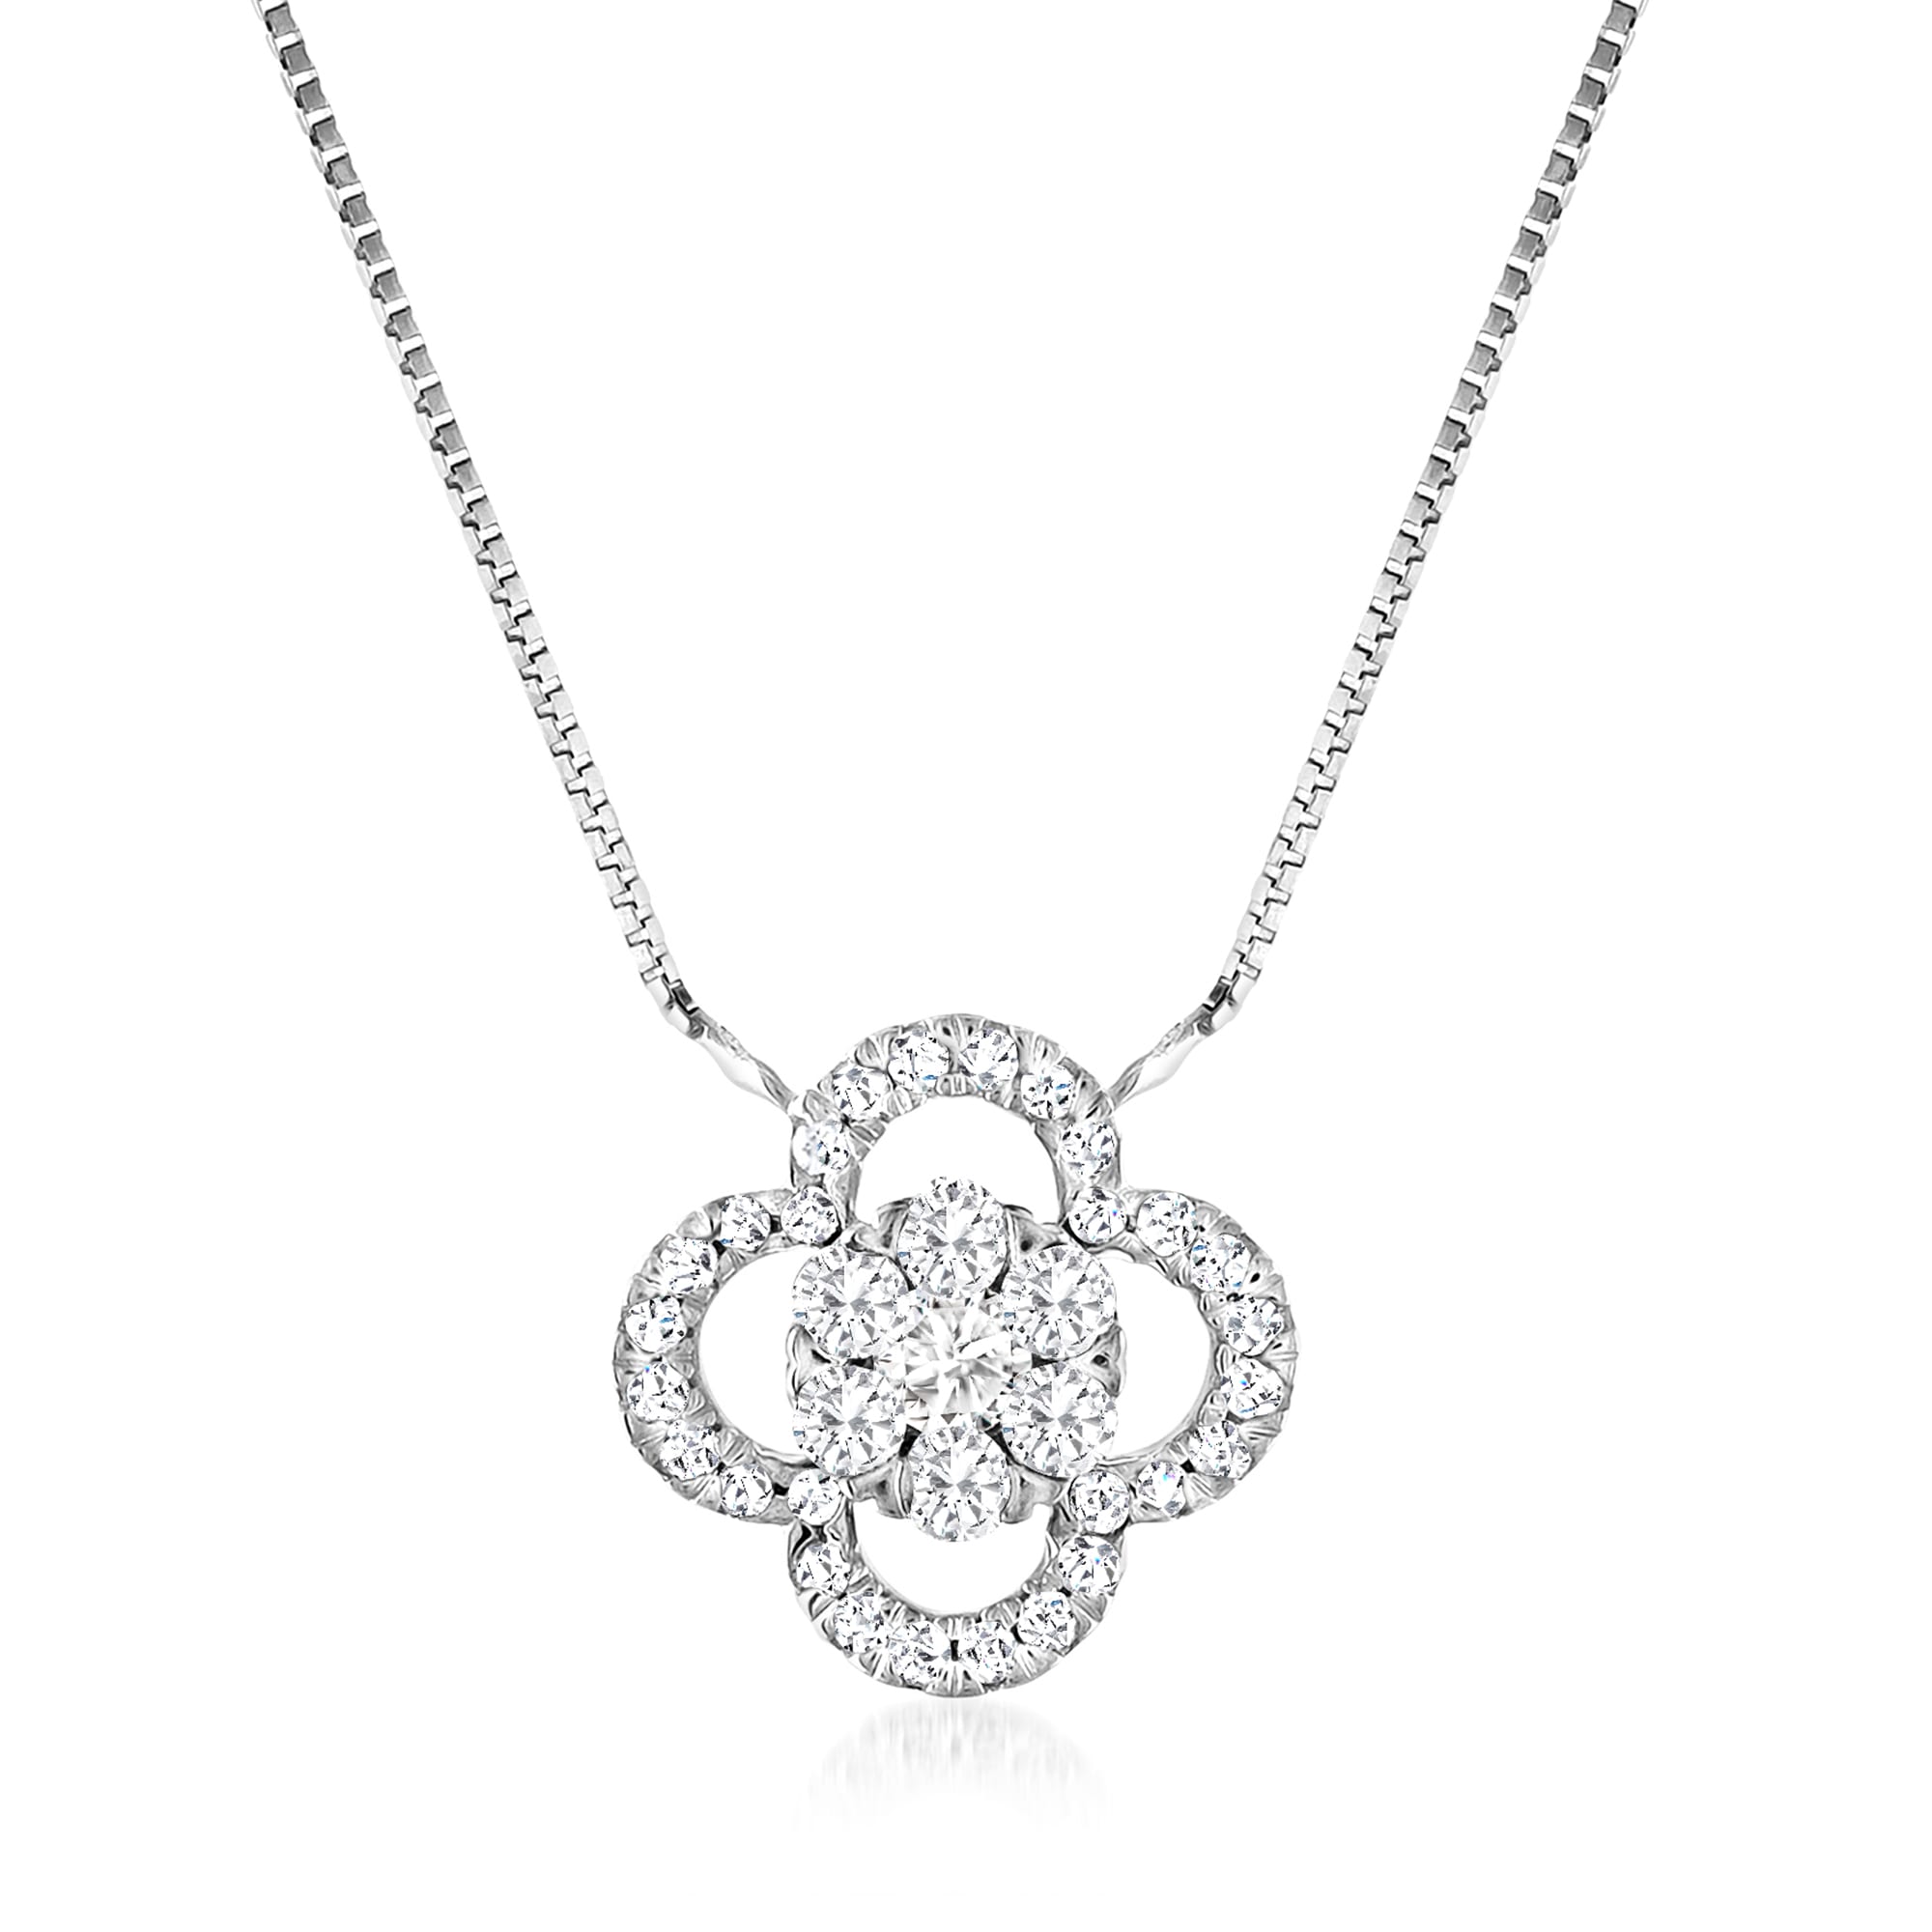 .30 ct. t.w. Diamond Clover Necklace in 14kt White Gold. 18